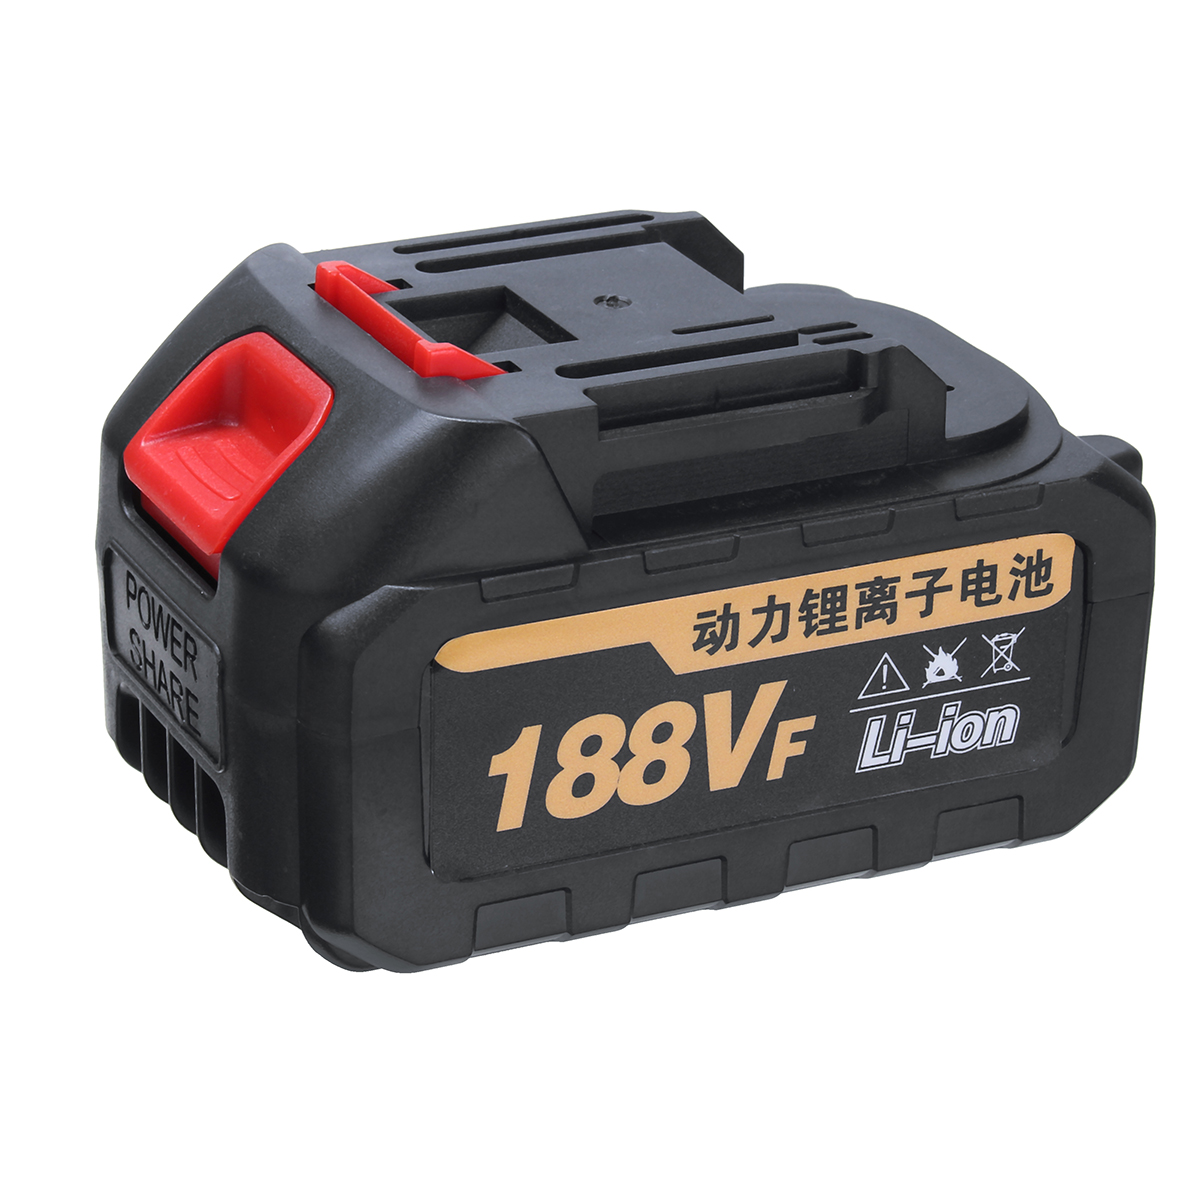 188VF-380Nm-12quot-Brushless-Cordless-Electric-Impact-Wrench-15000mAH-2x-Battery-1573435-8